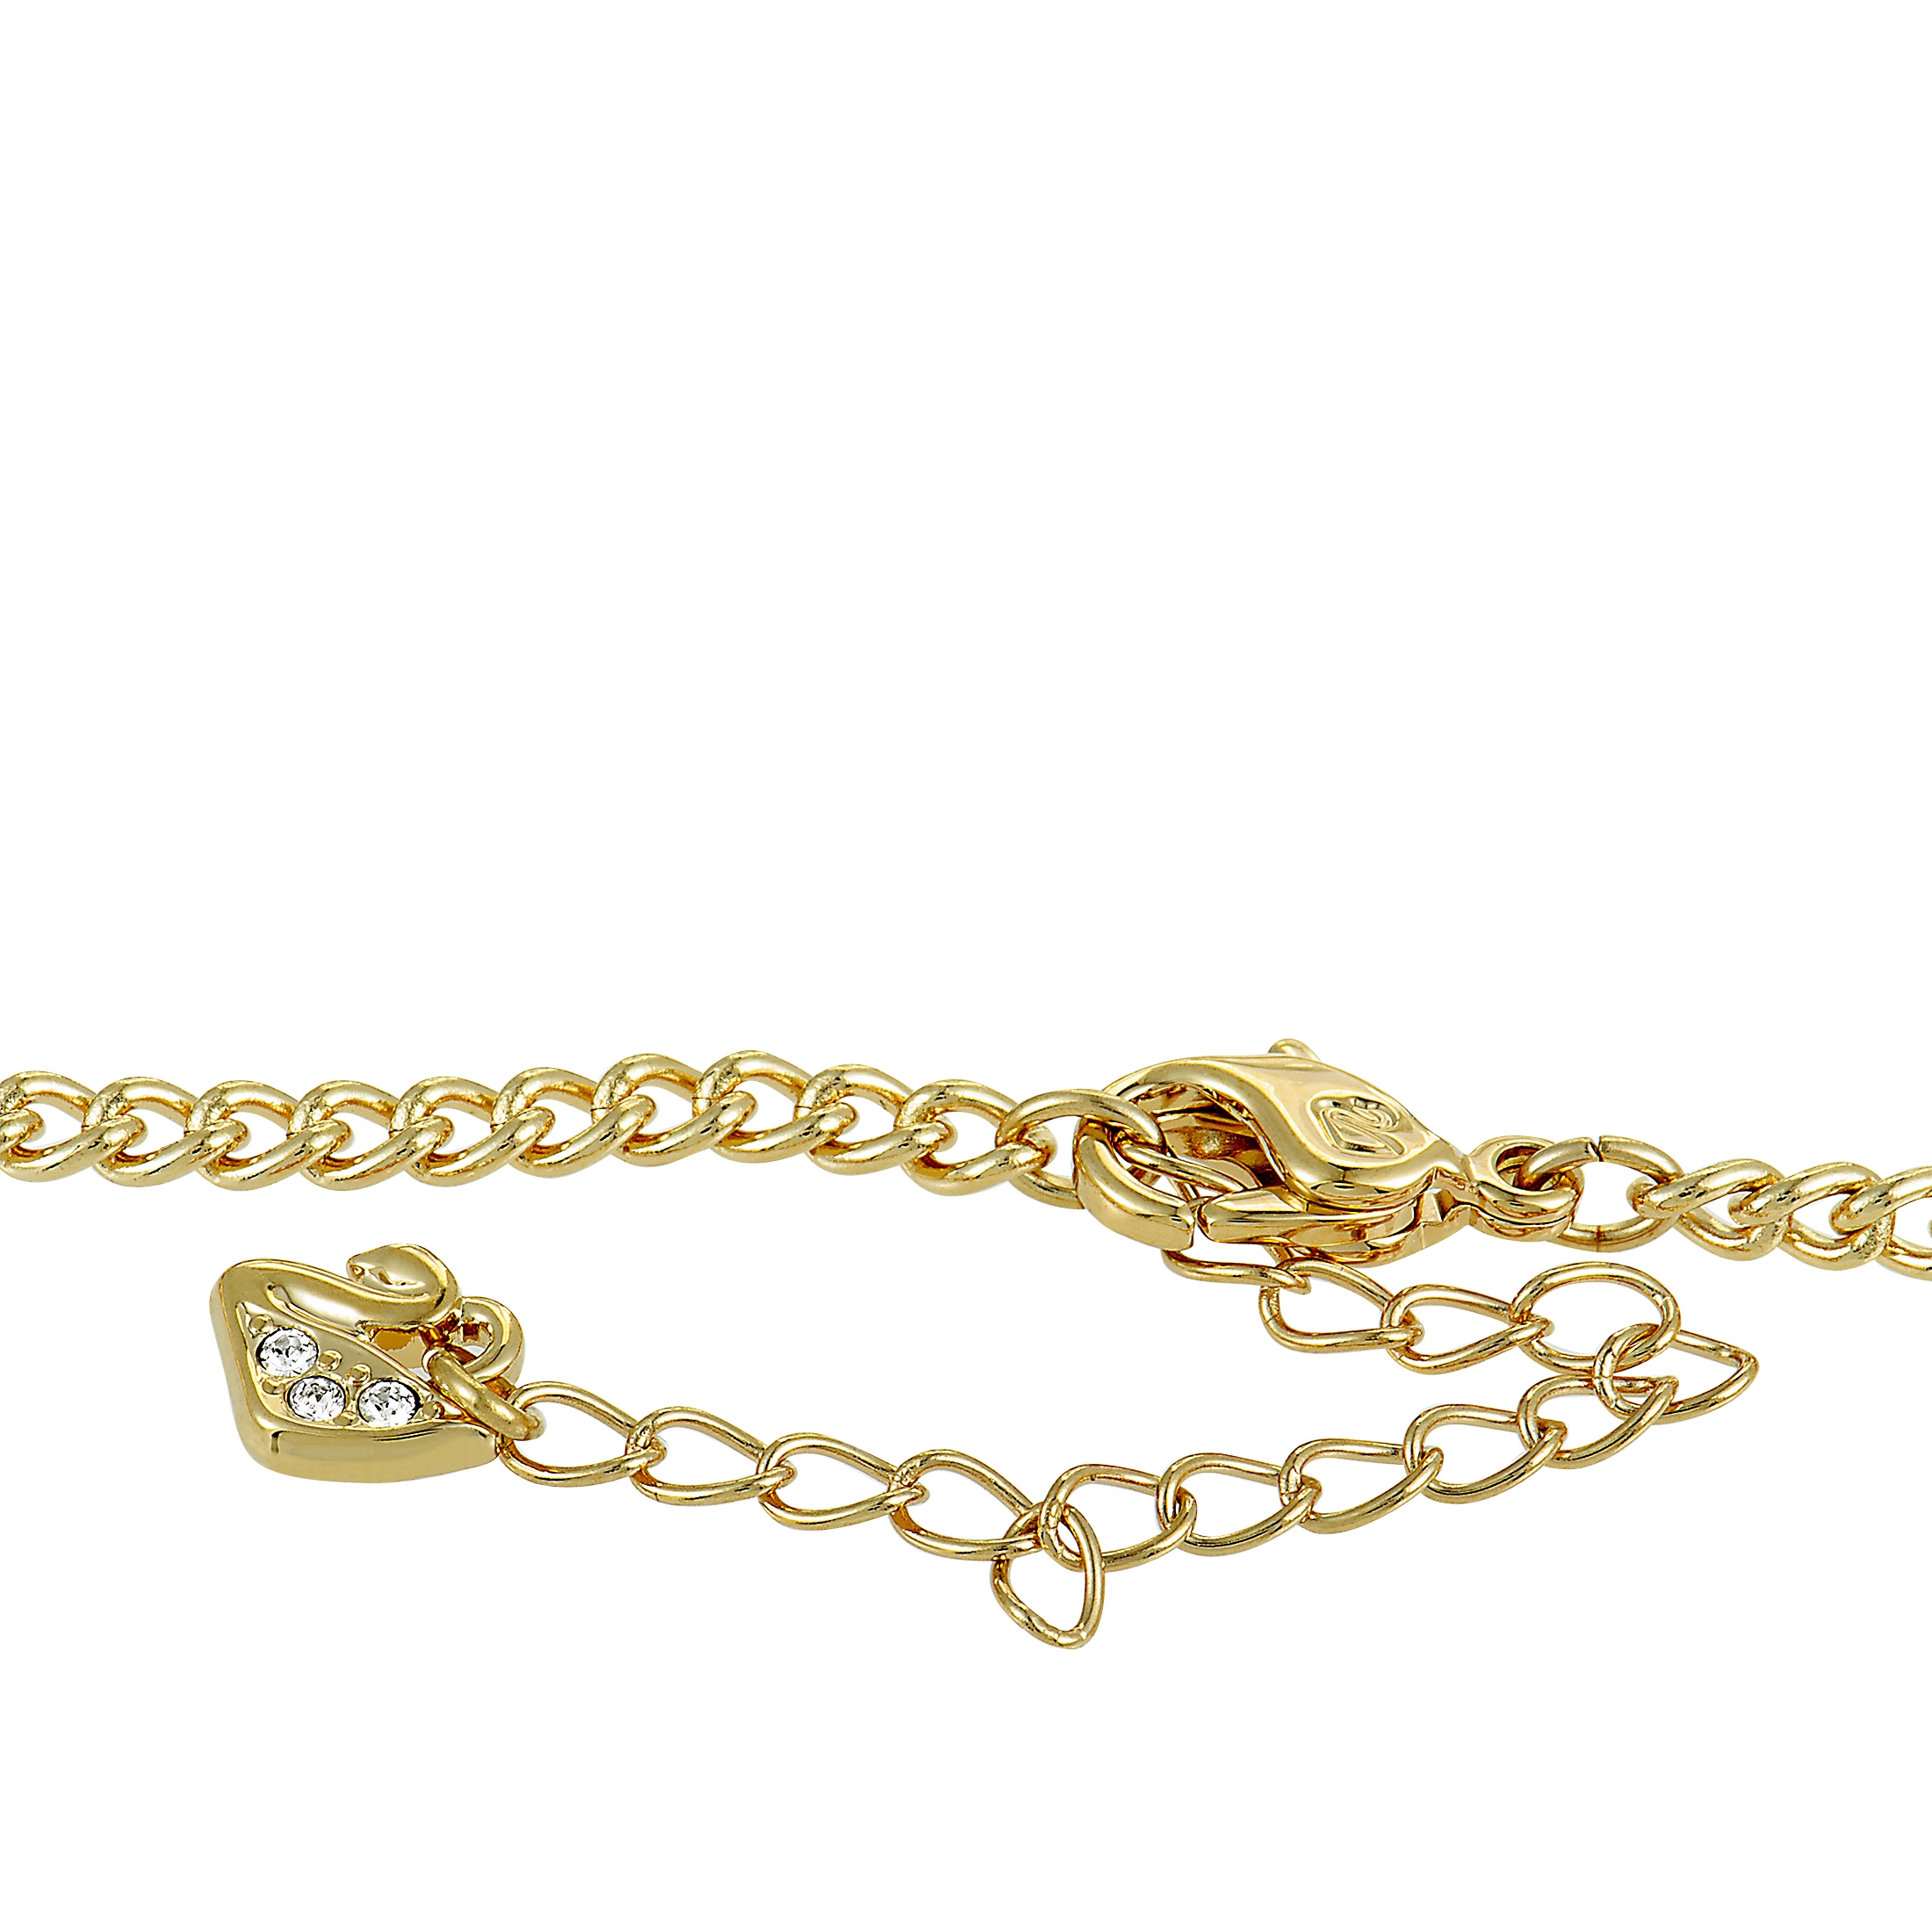 Swarovski Gipsy Yellow Gold-Plated Crystal Necklace